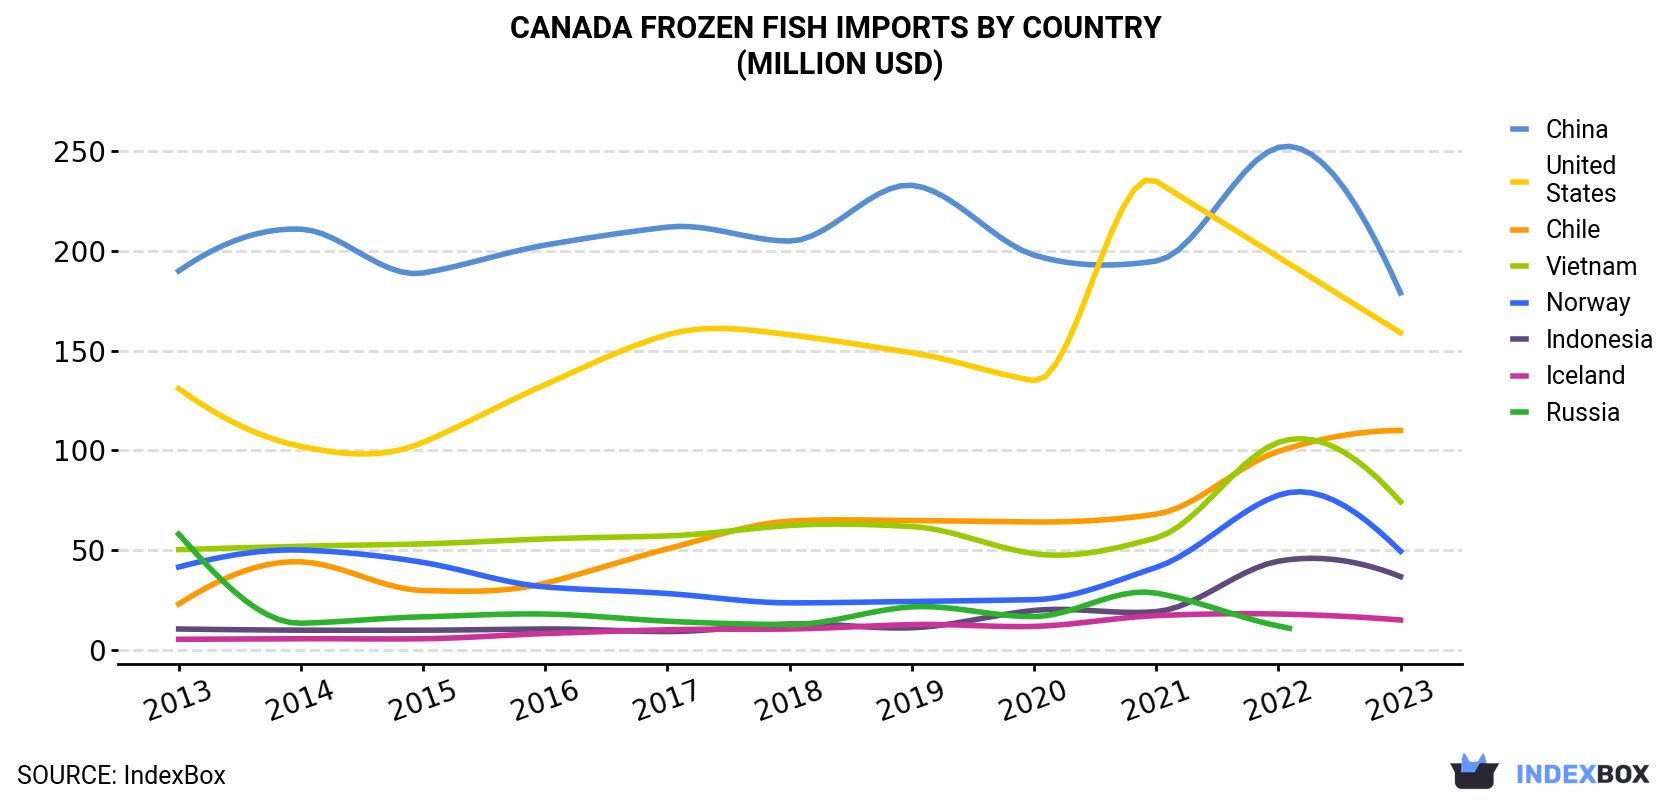 Canada Frozen Fish Imports By Country (Million USD)